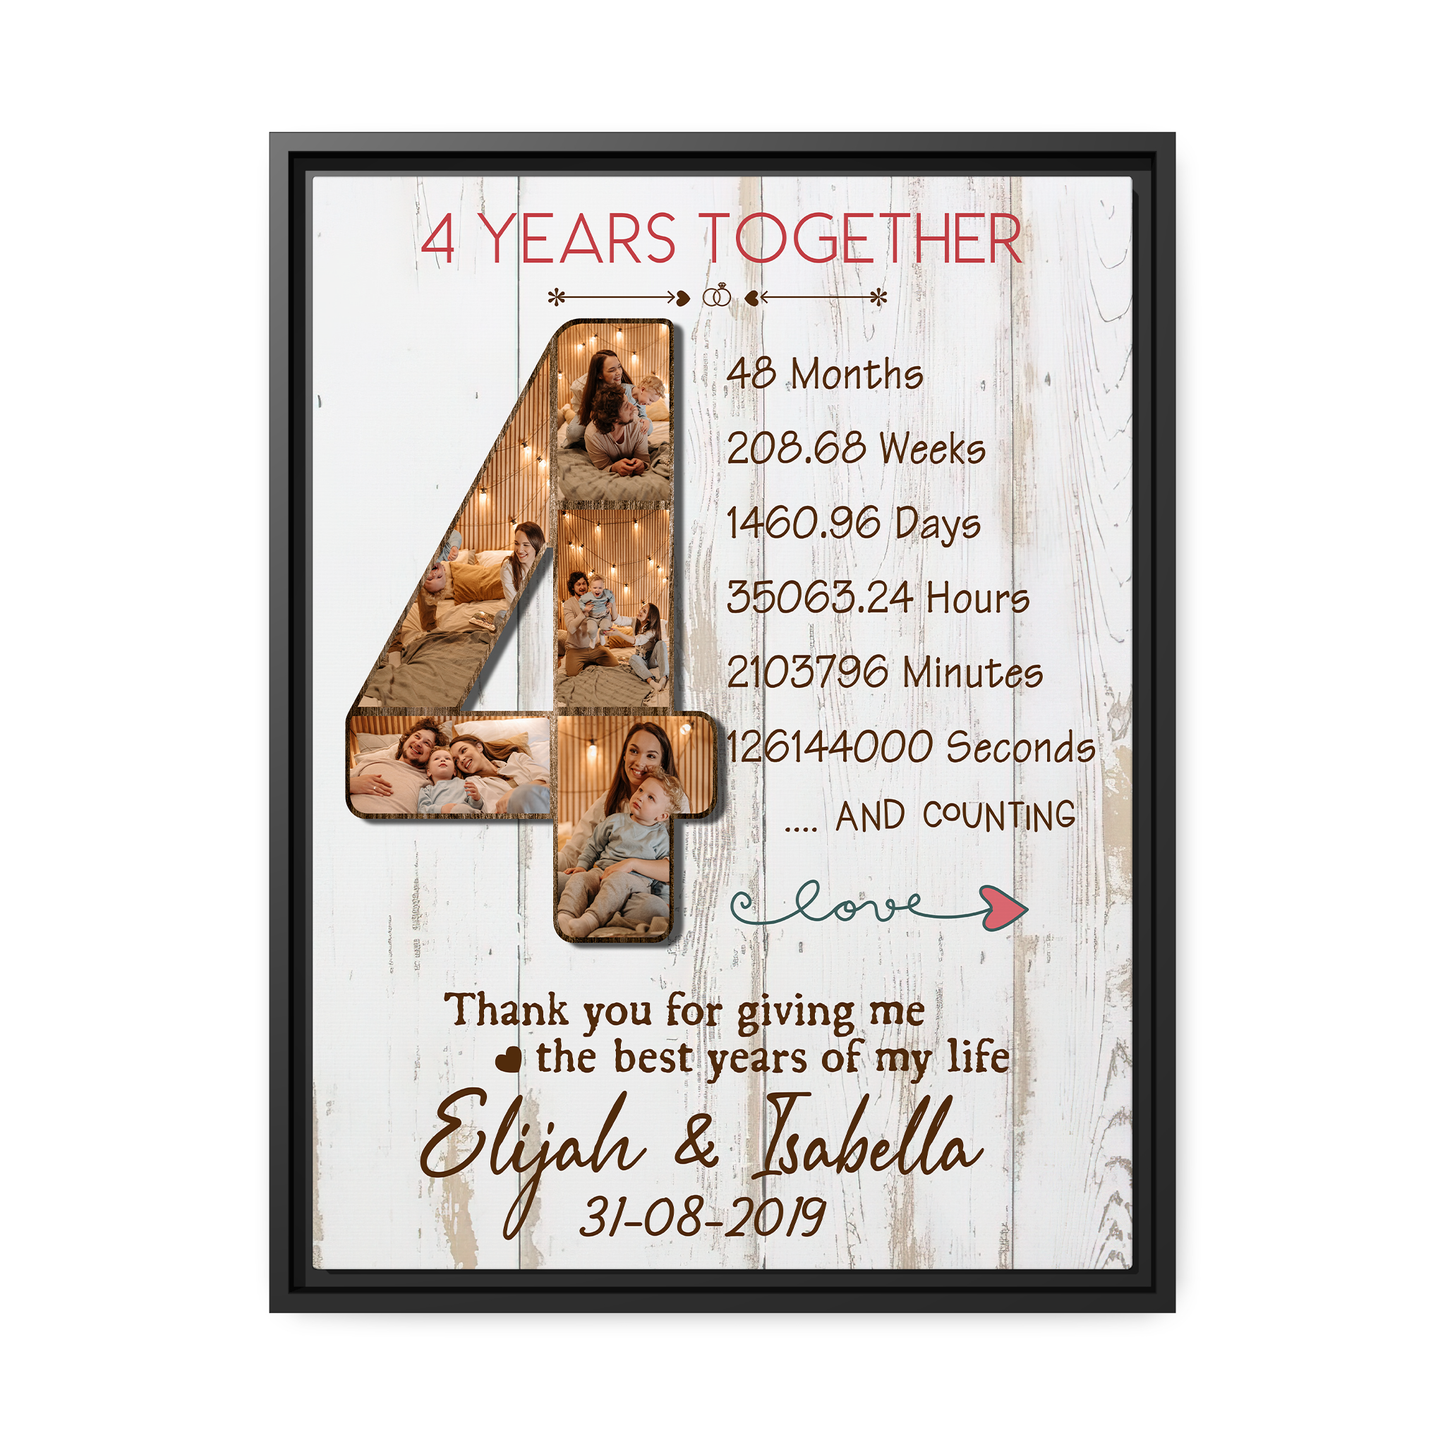 Personalized Picture Frames 4th 4 Year Wedding Anniversary Gifts For Him Her